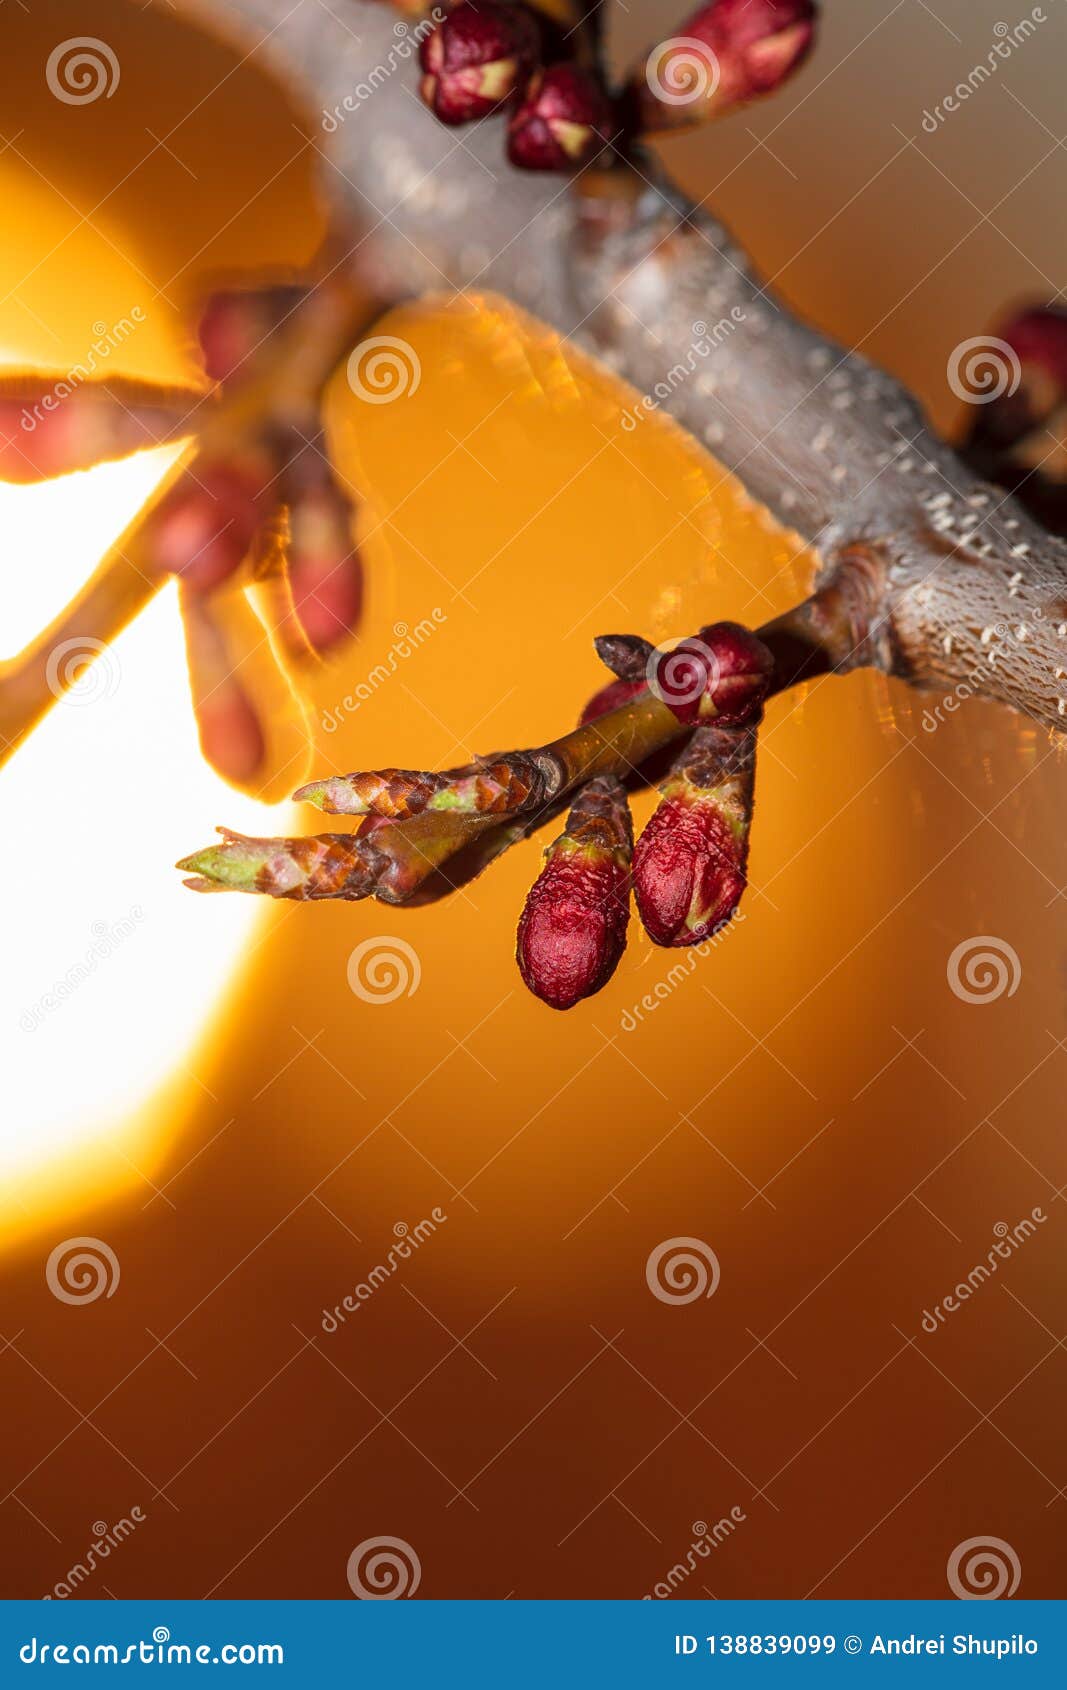 Flowers Blossom on Apricot Tree at Sunset Stock Image - Image of spring ...